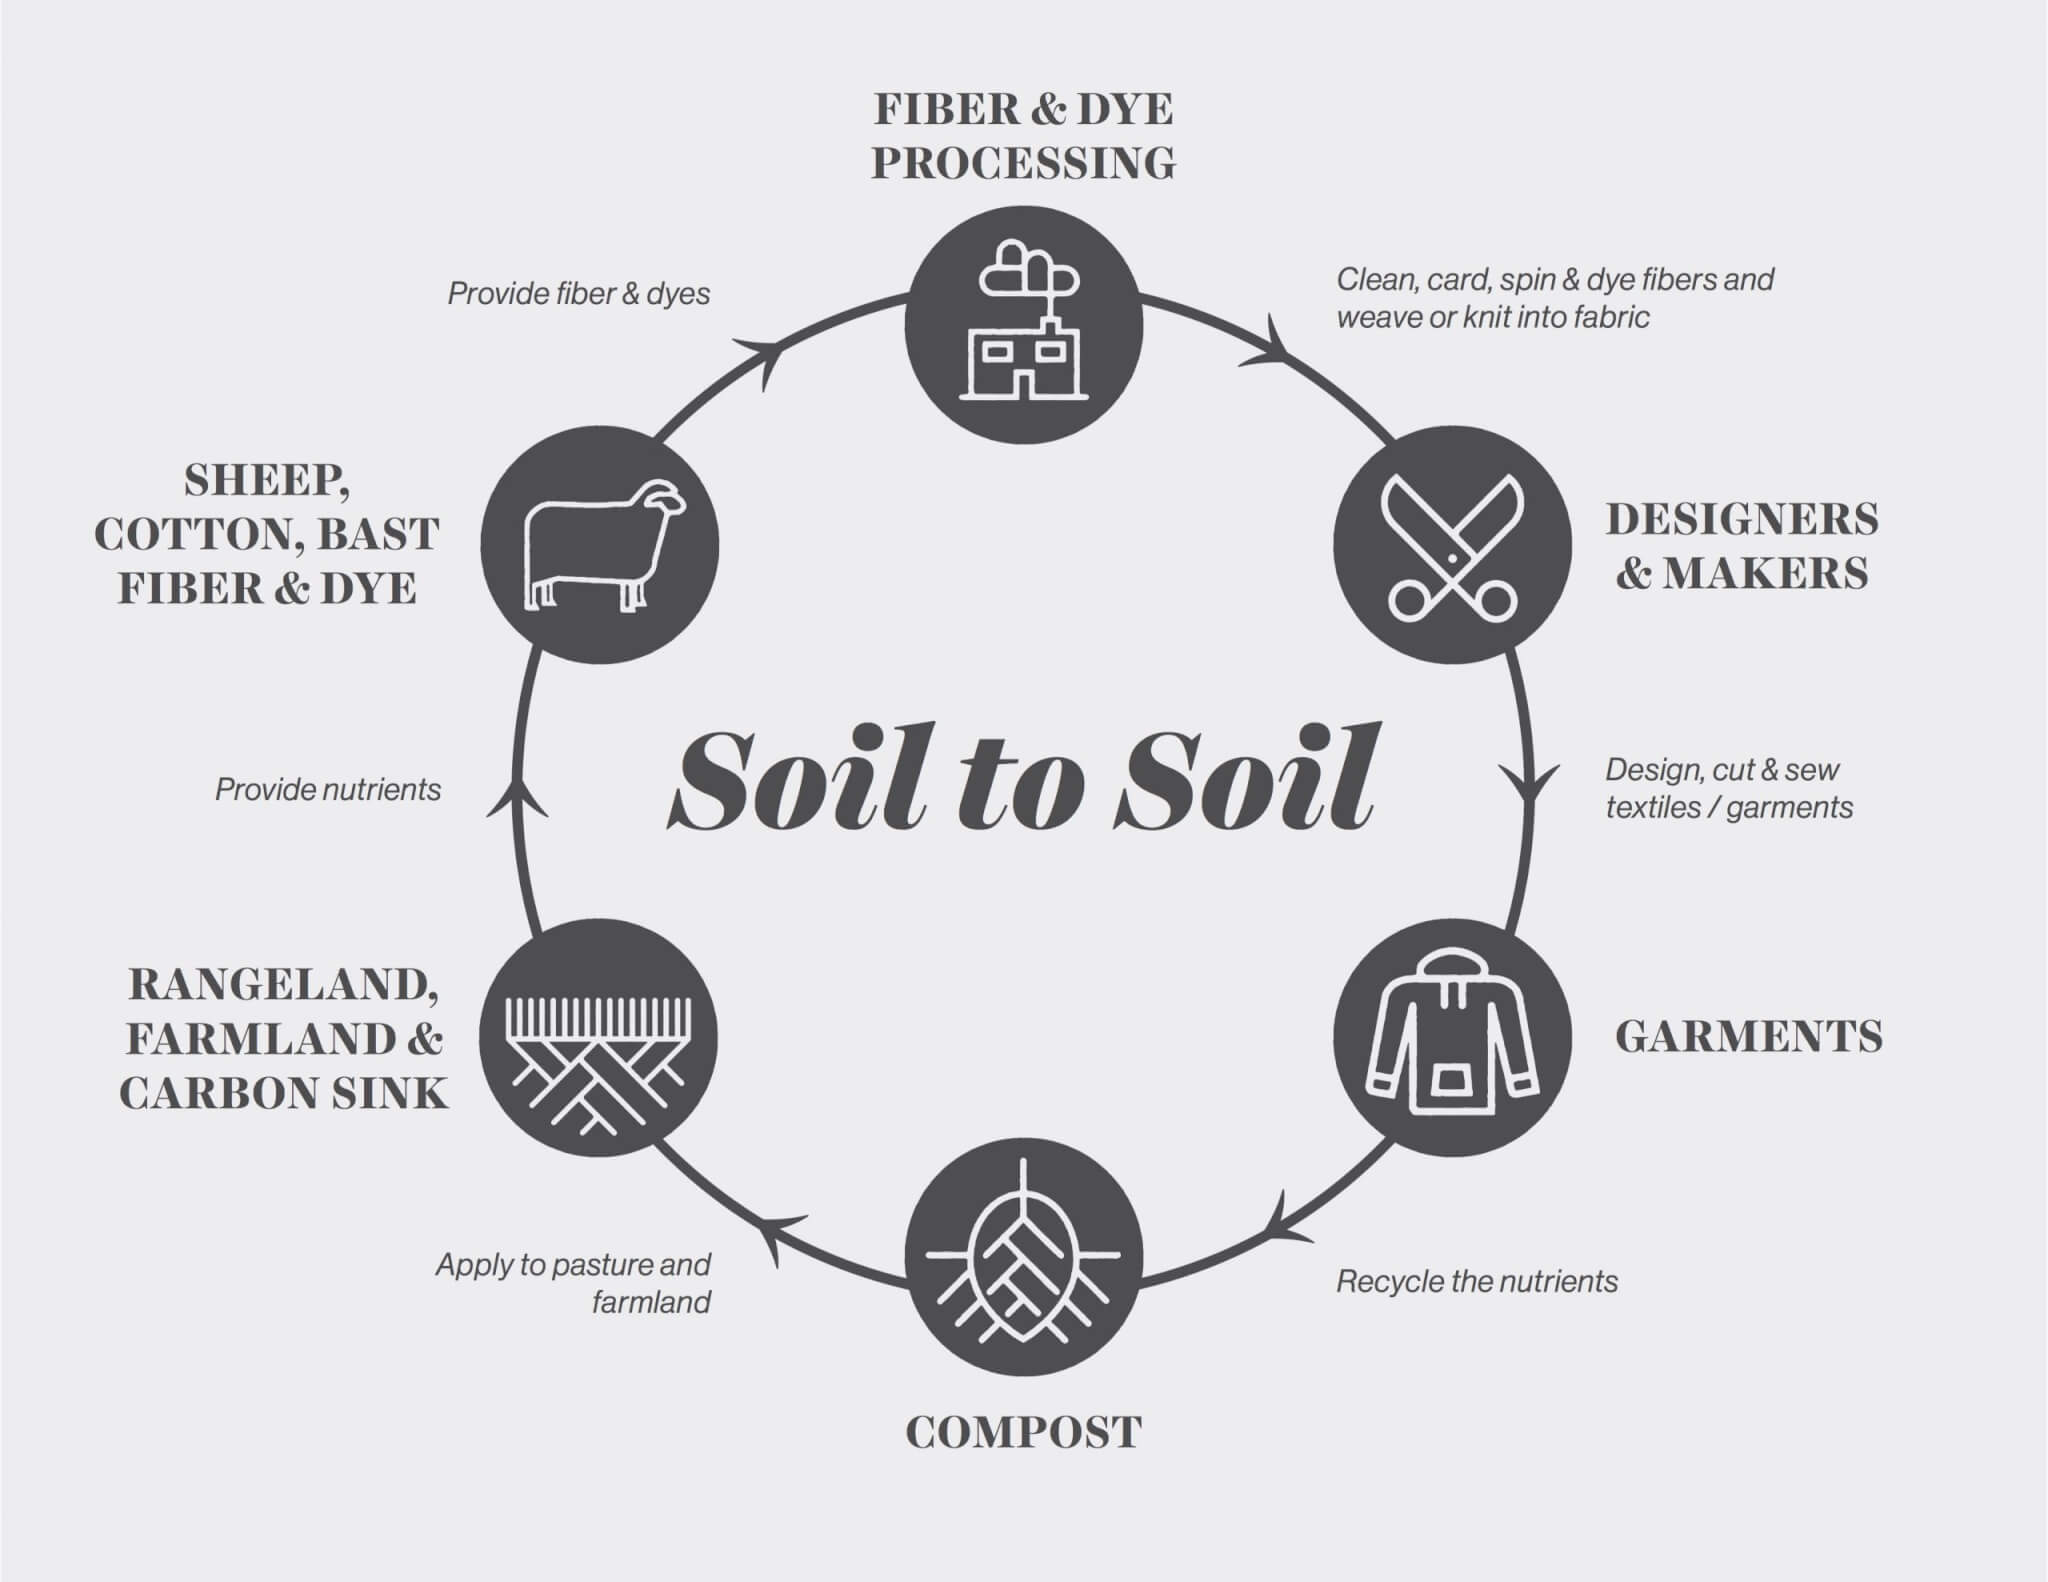 The ‘soil to soil’ system of Fibershed